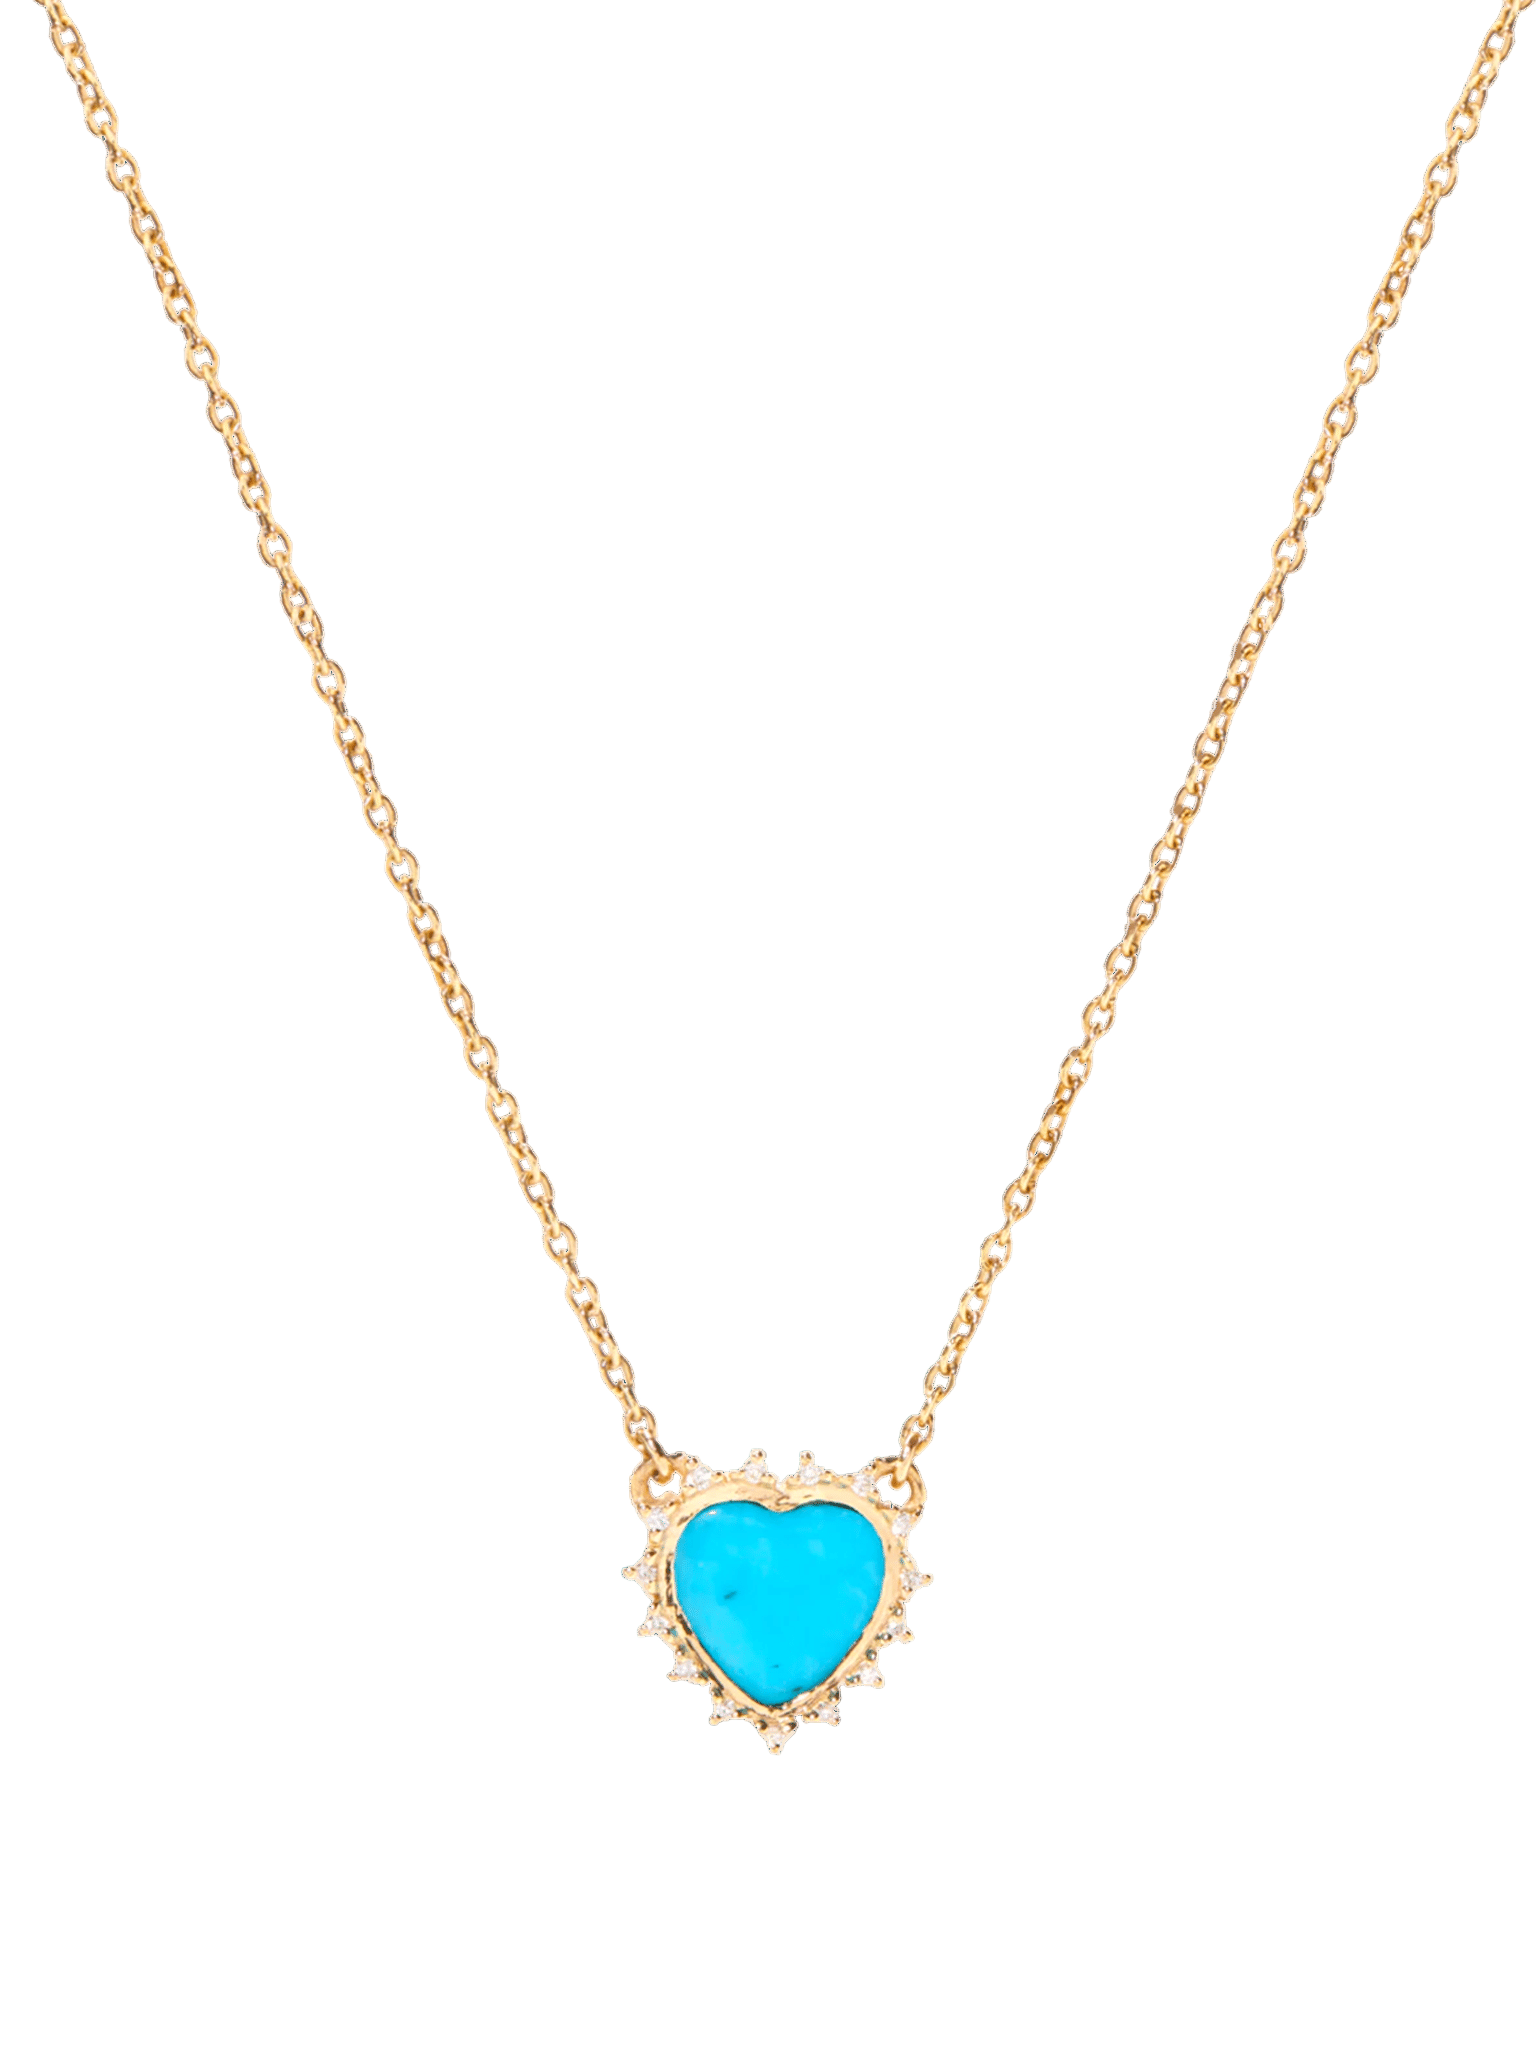 Diamond and turquoise heart necklace